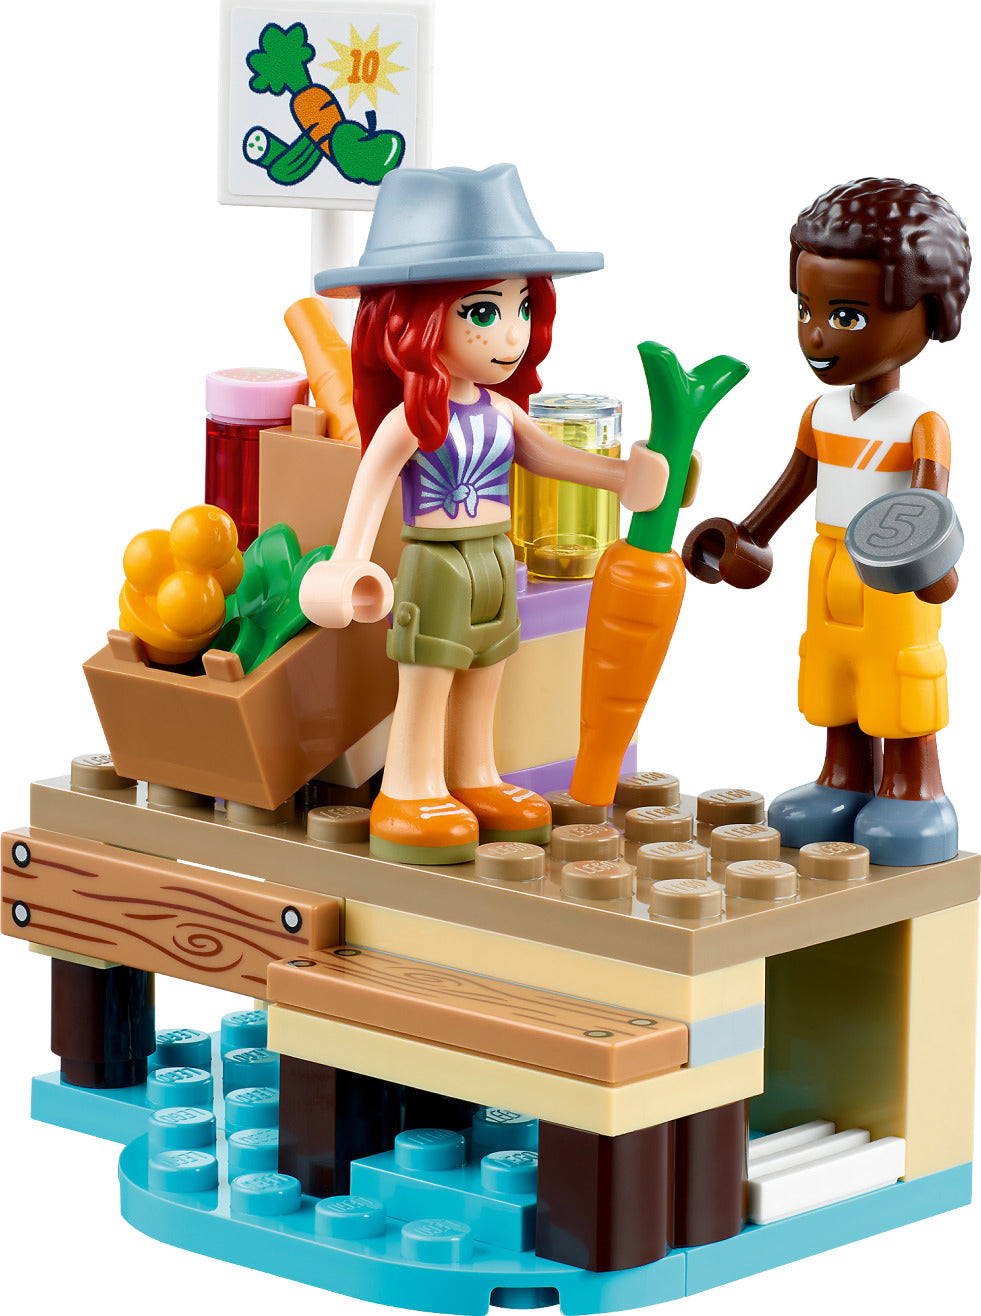 LEGO® Friends: Canal Houseboat